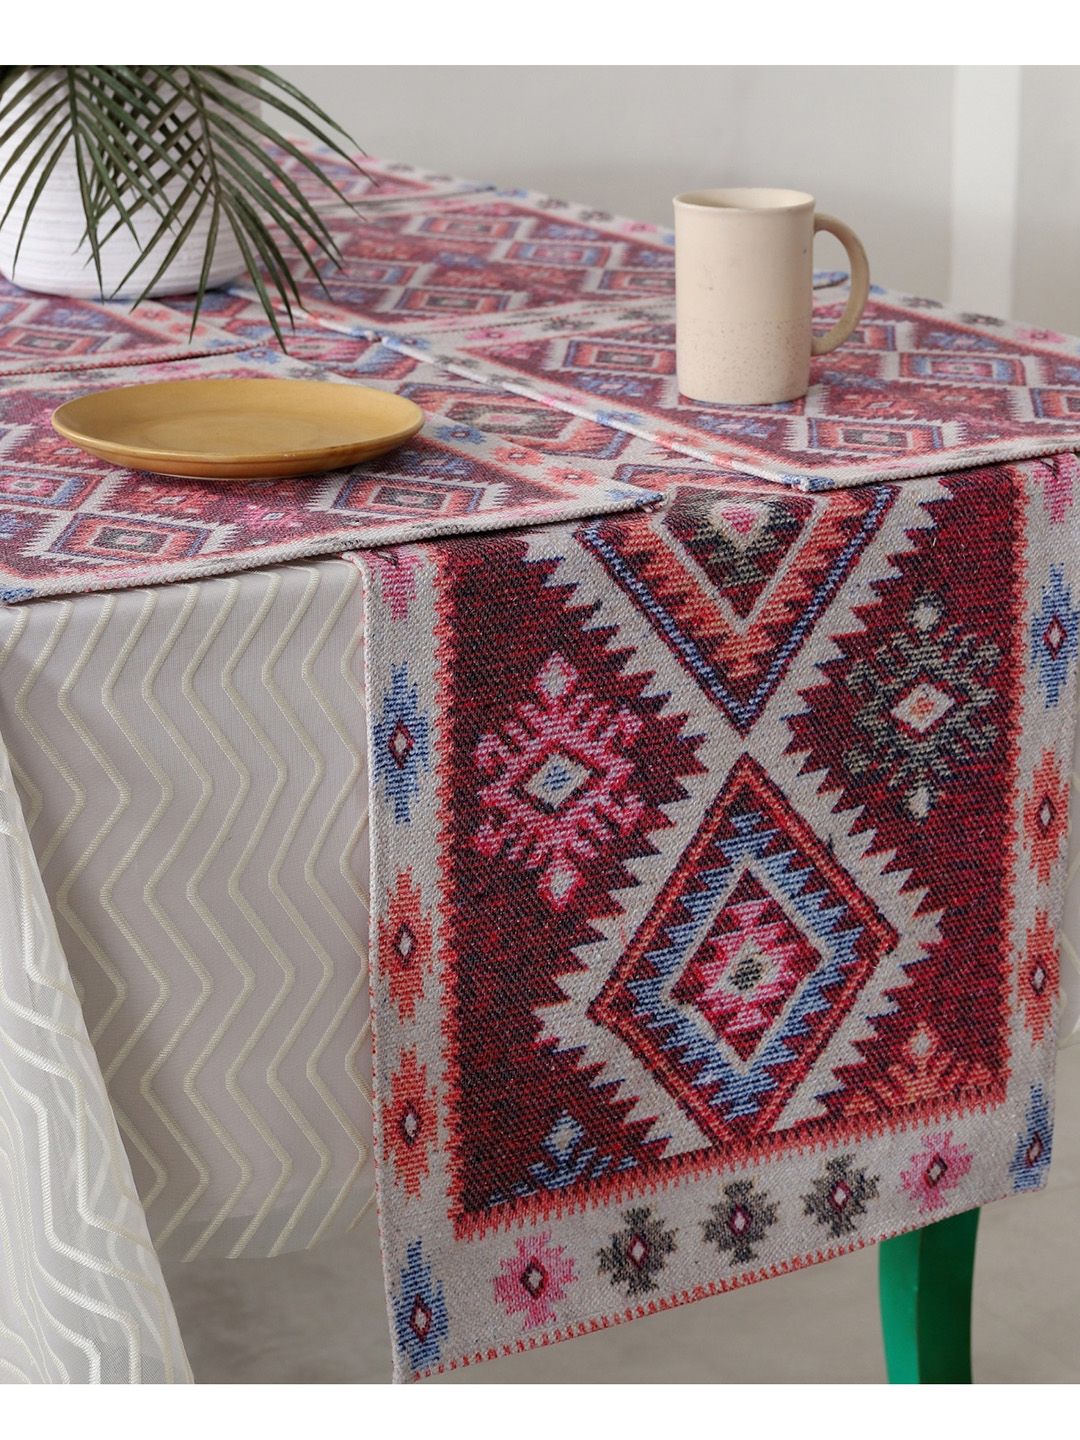 HANDICRAFT PALACE Maroon Ikat Patchwork Cotton Table Runner And Table Placemats Price in India